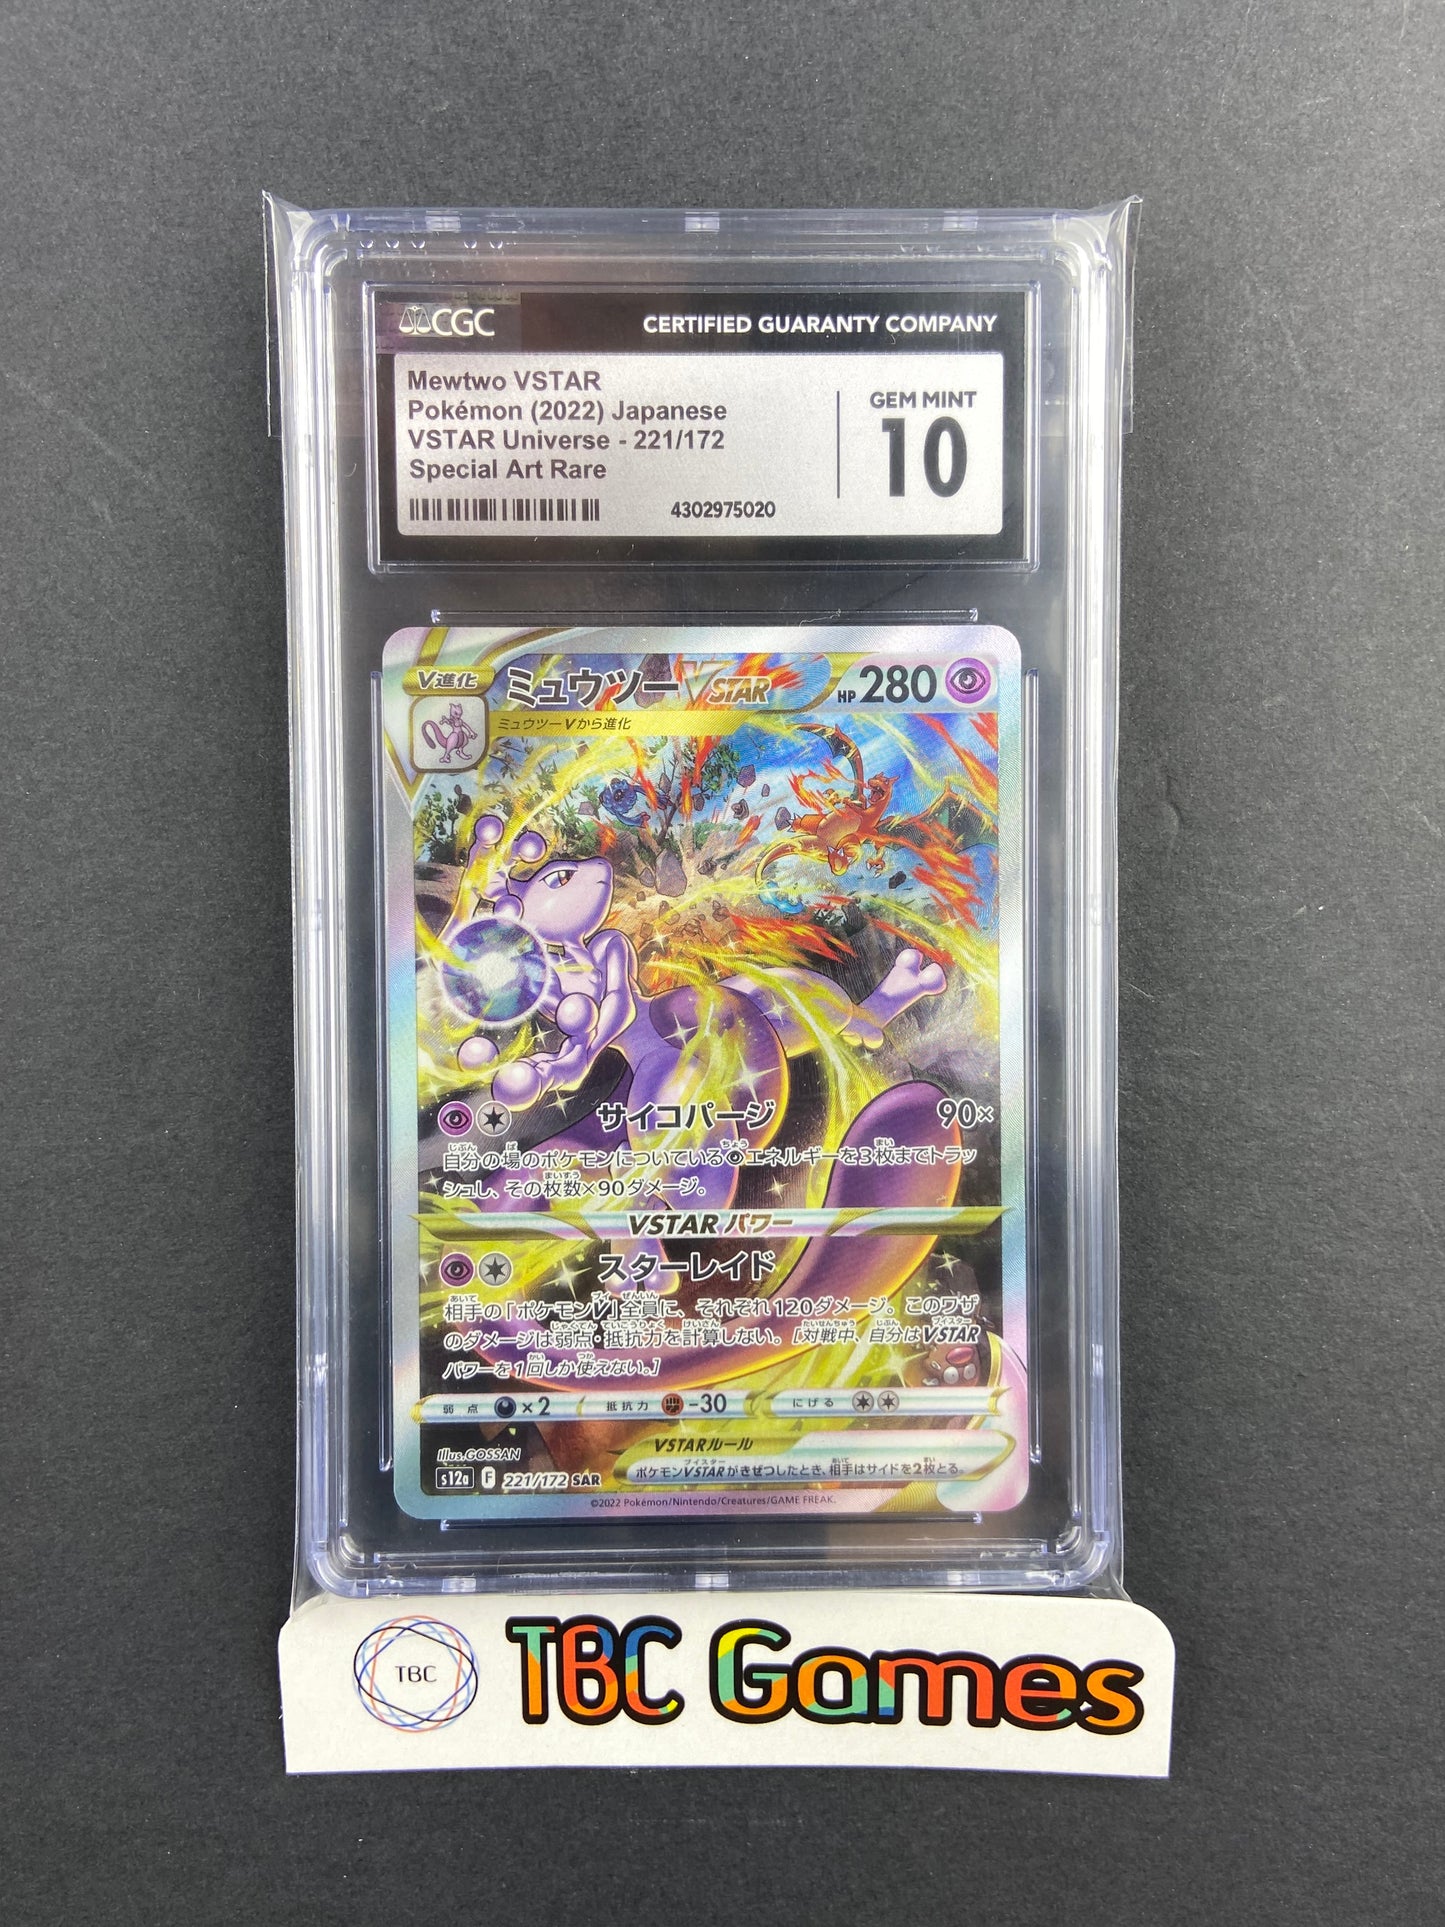 Mewtwo VSTAR Universe s12a 221/172 Japanese CGC 10